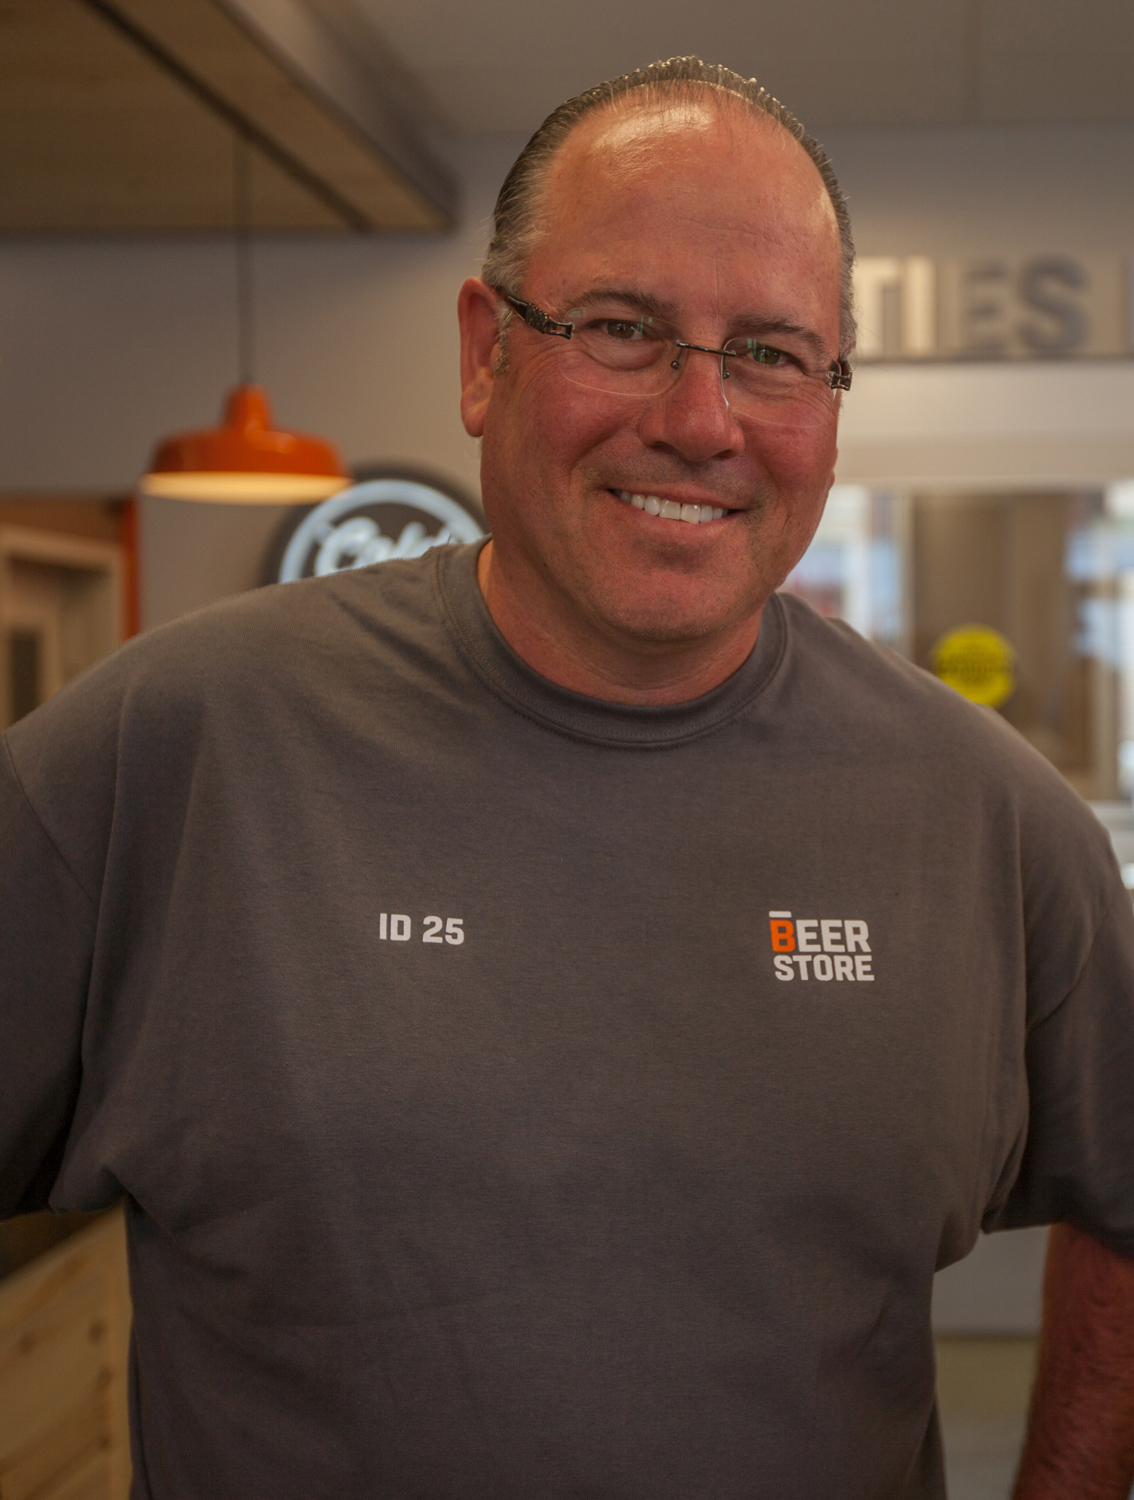 Ted Moroz, President of The Beer Store and Brewers Distributor Ltd.